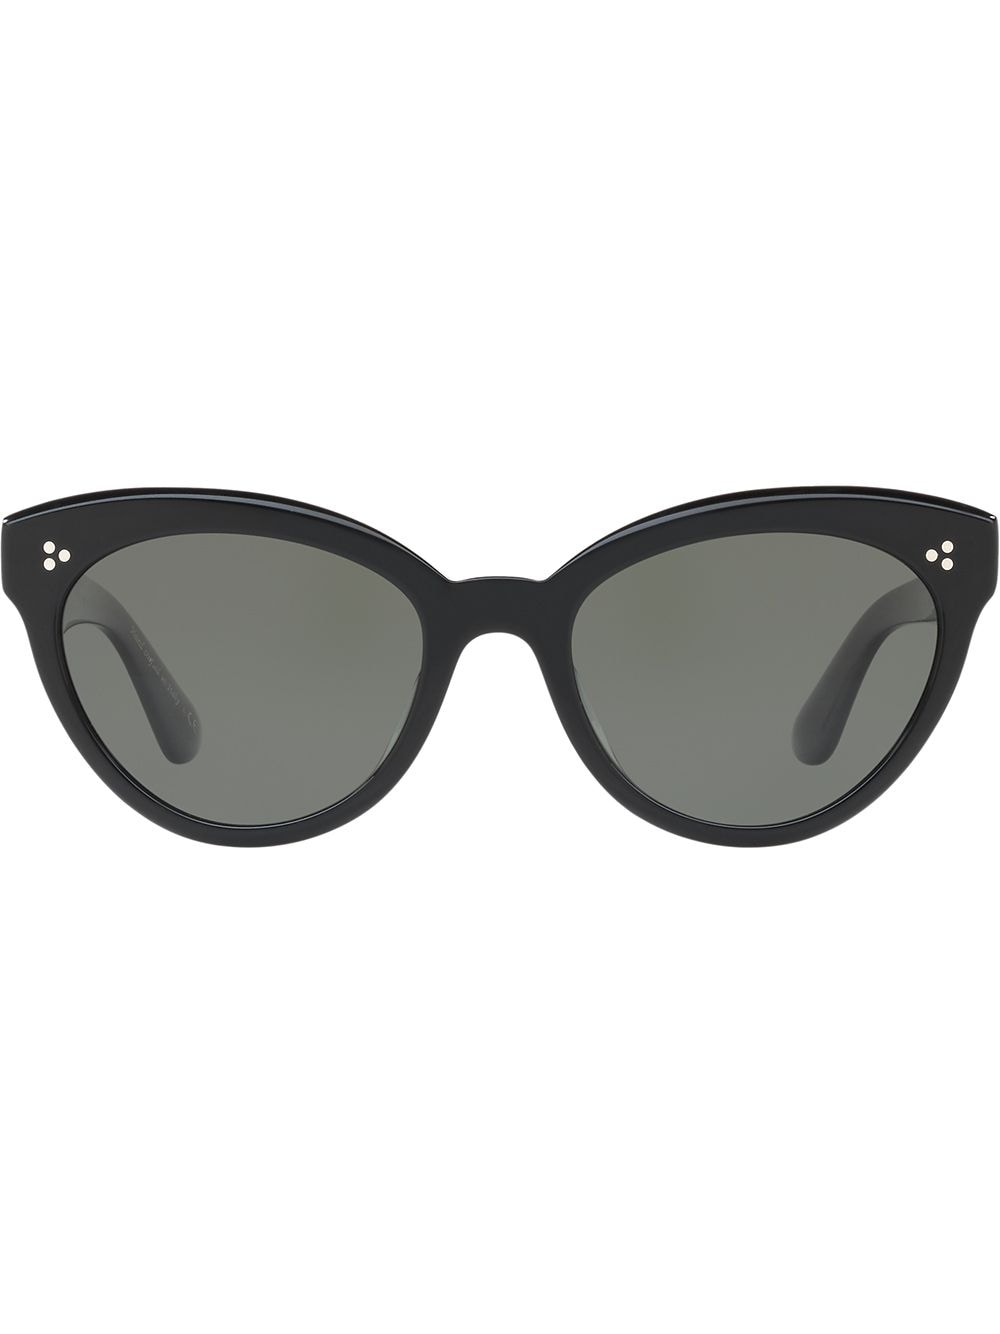 Image 1 of Oliver Peoples Roella cat eye sunglasses